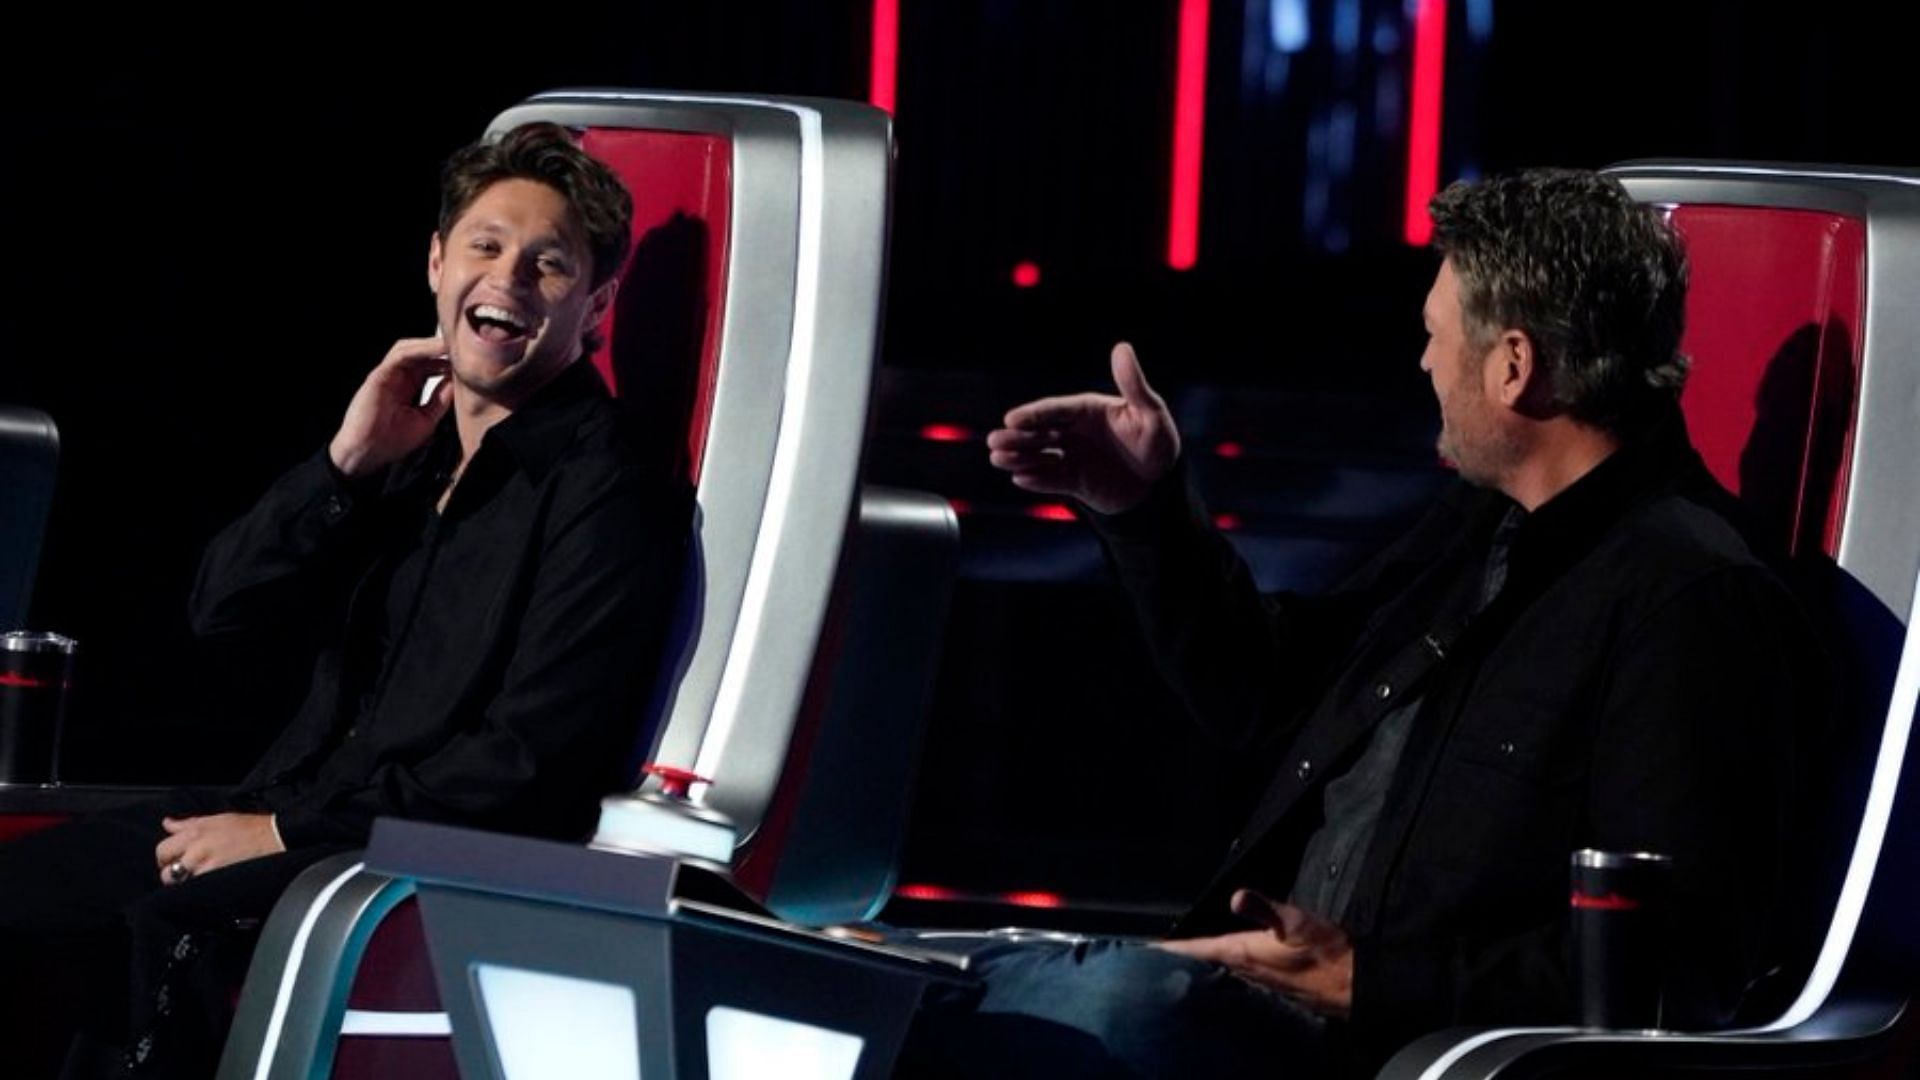 The Voice season 23 airs a new episode this Monday